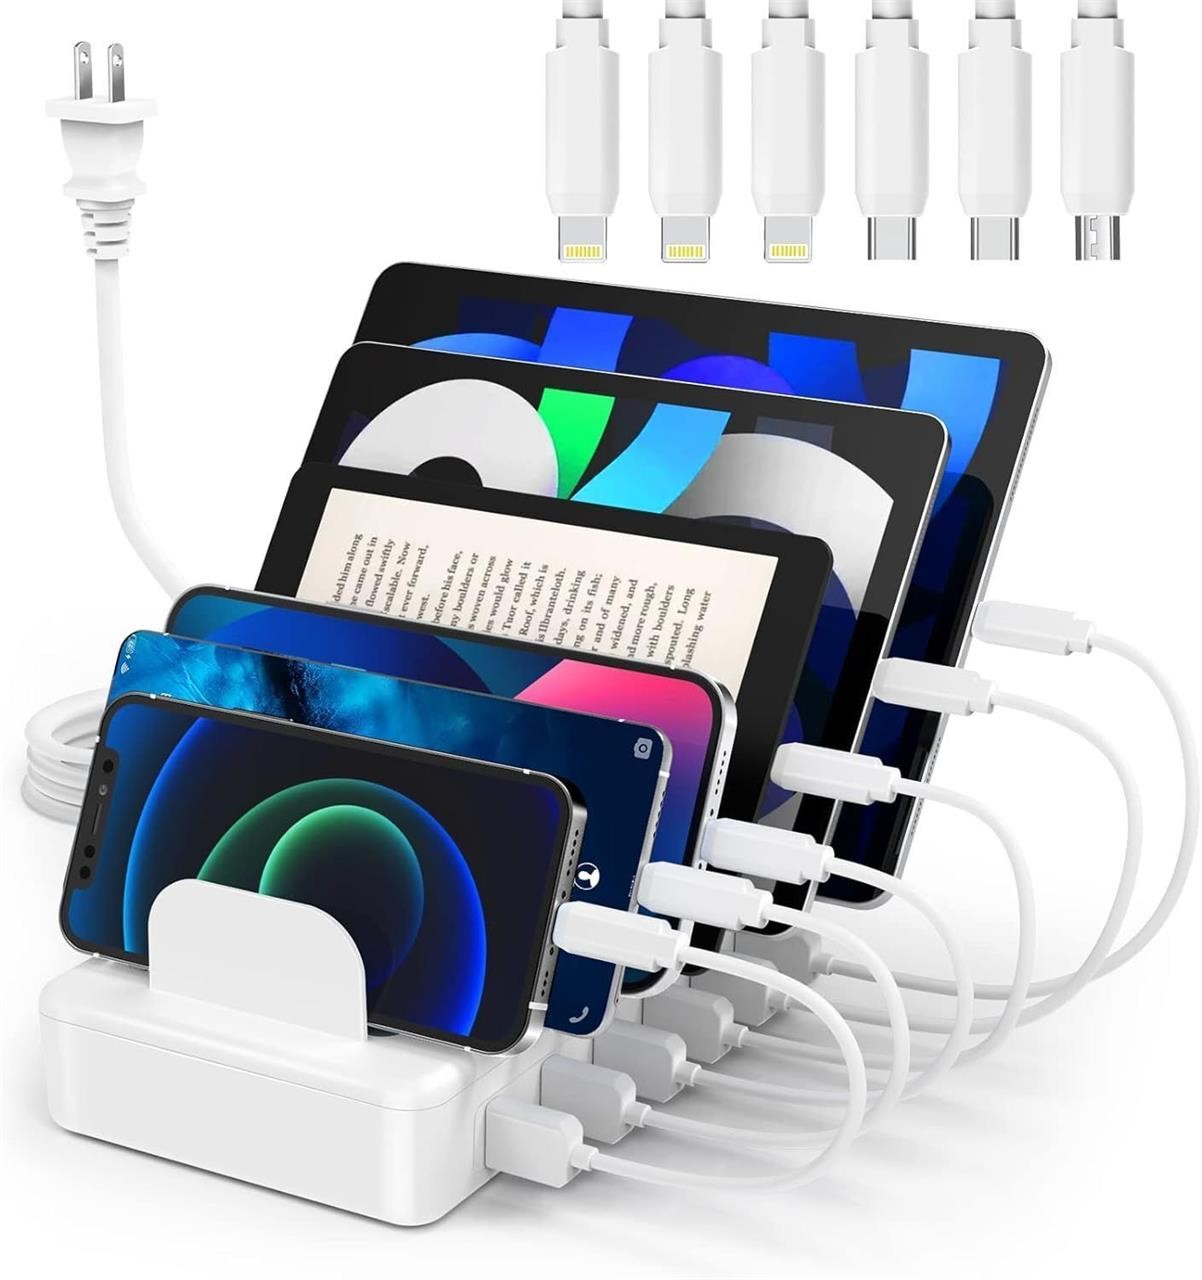 NEW $44 6 USB Port Charging Station w/6 Cables